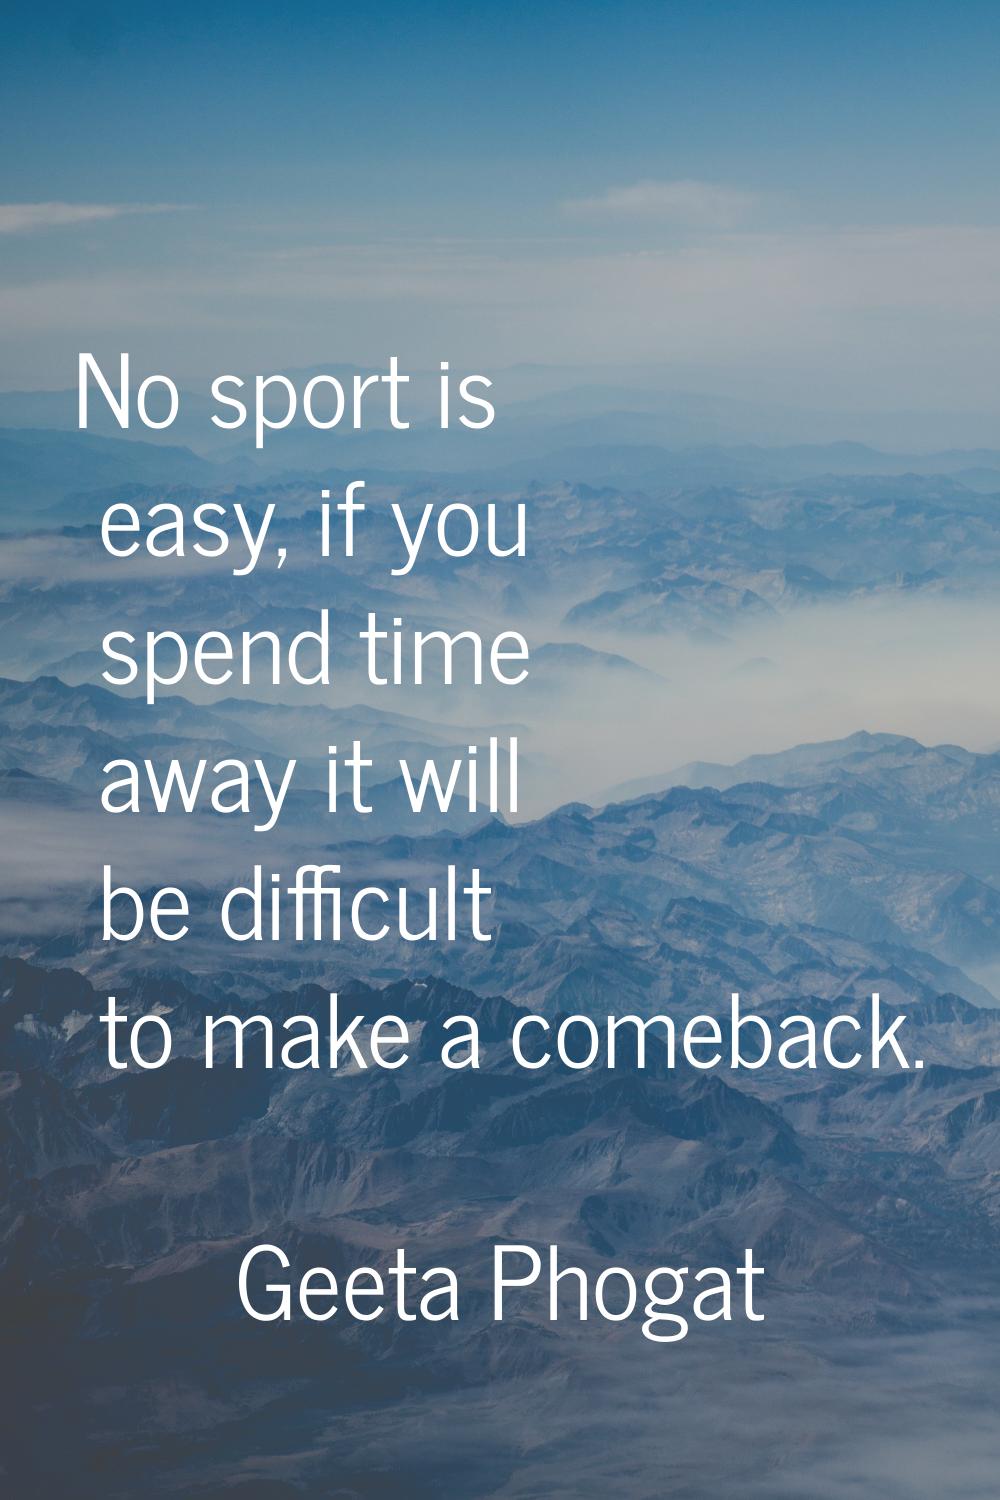 No sport is easy, if you spend time away it will be difficult to make a comeback.